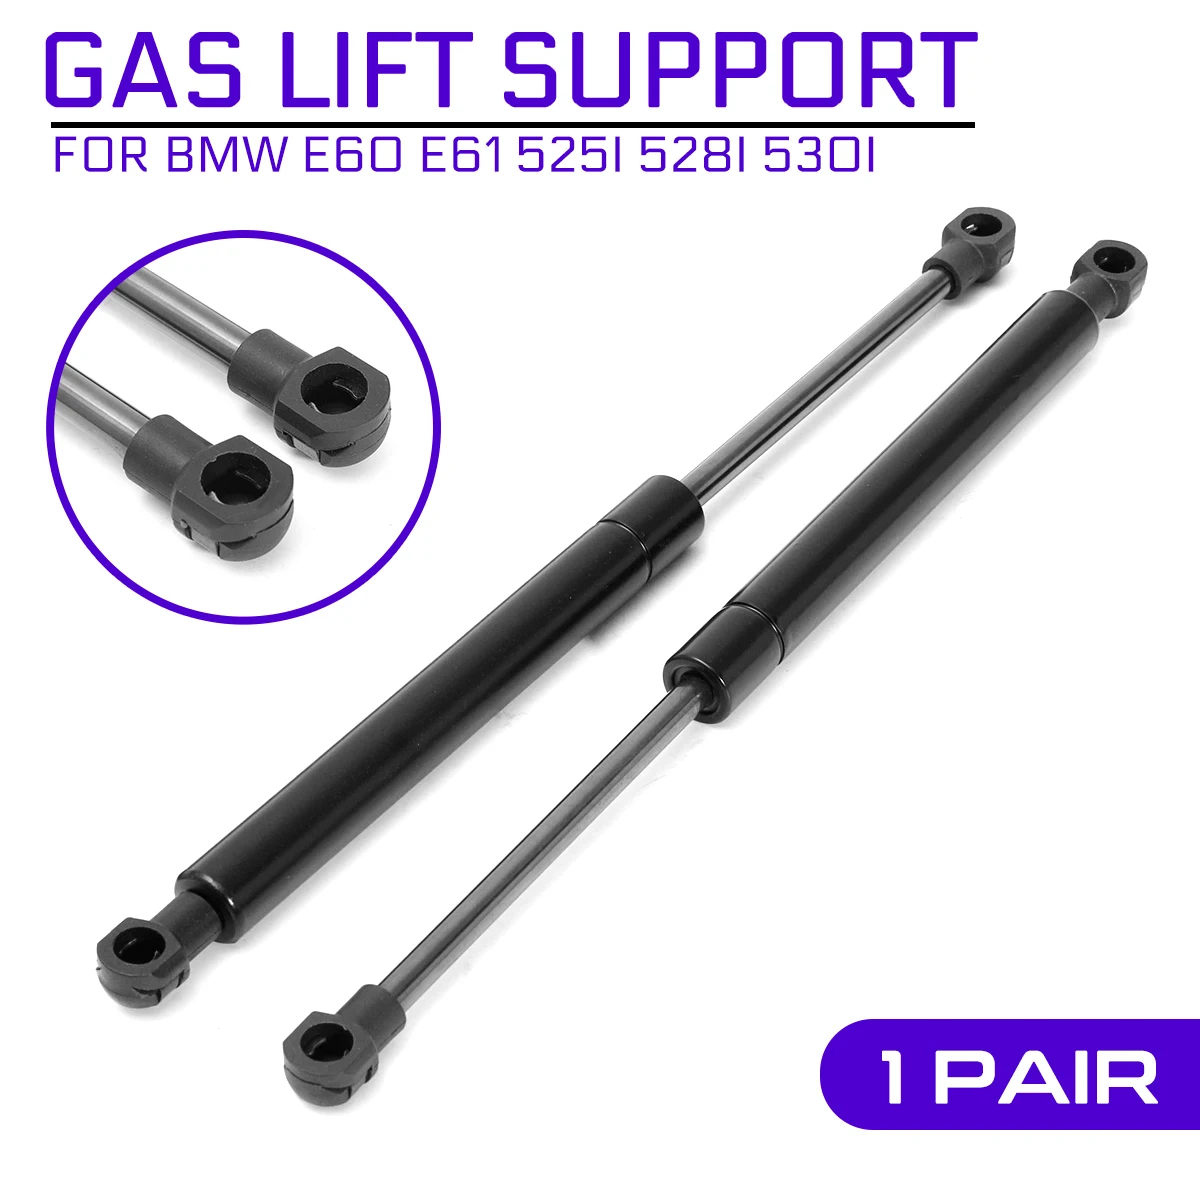 

For BMW E60 E61 525i 528i 530i 2pcs Car Support Rod Front Hood Gas Lift Support Shock Strut Damper Car Accessories Replacement